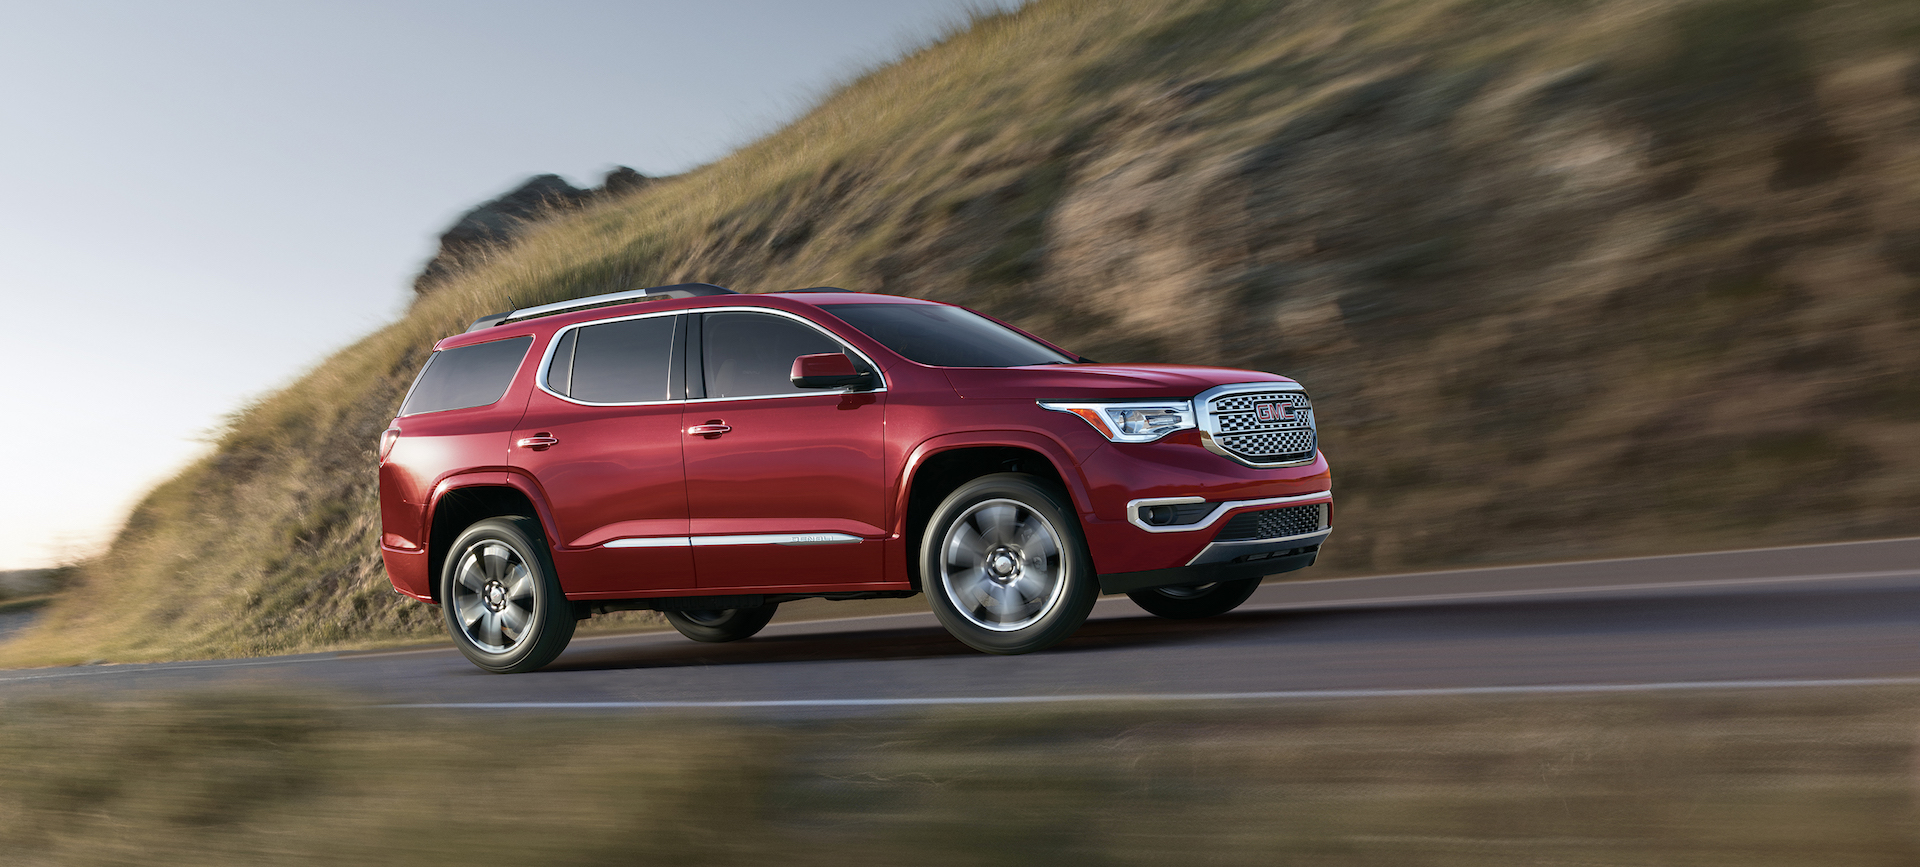 2017 Gmc Acadia Review Ratings Specs Prices And Photos